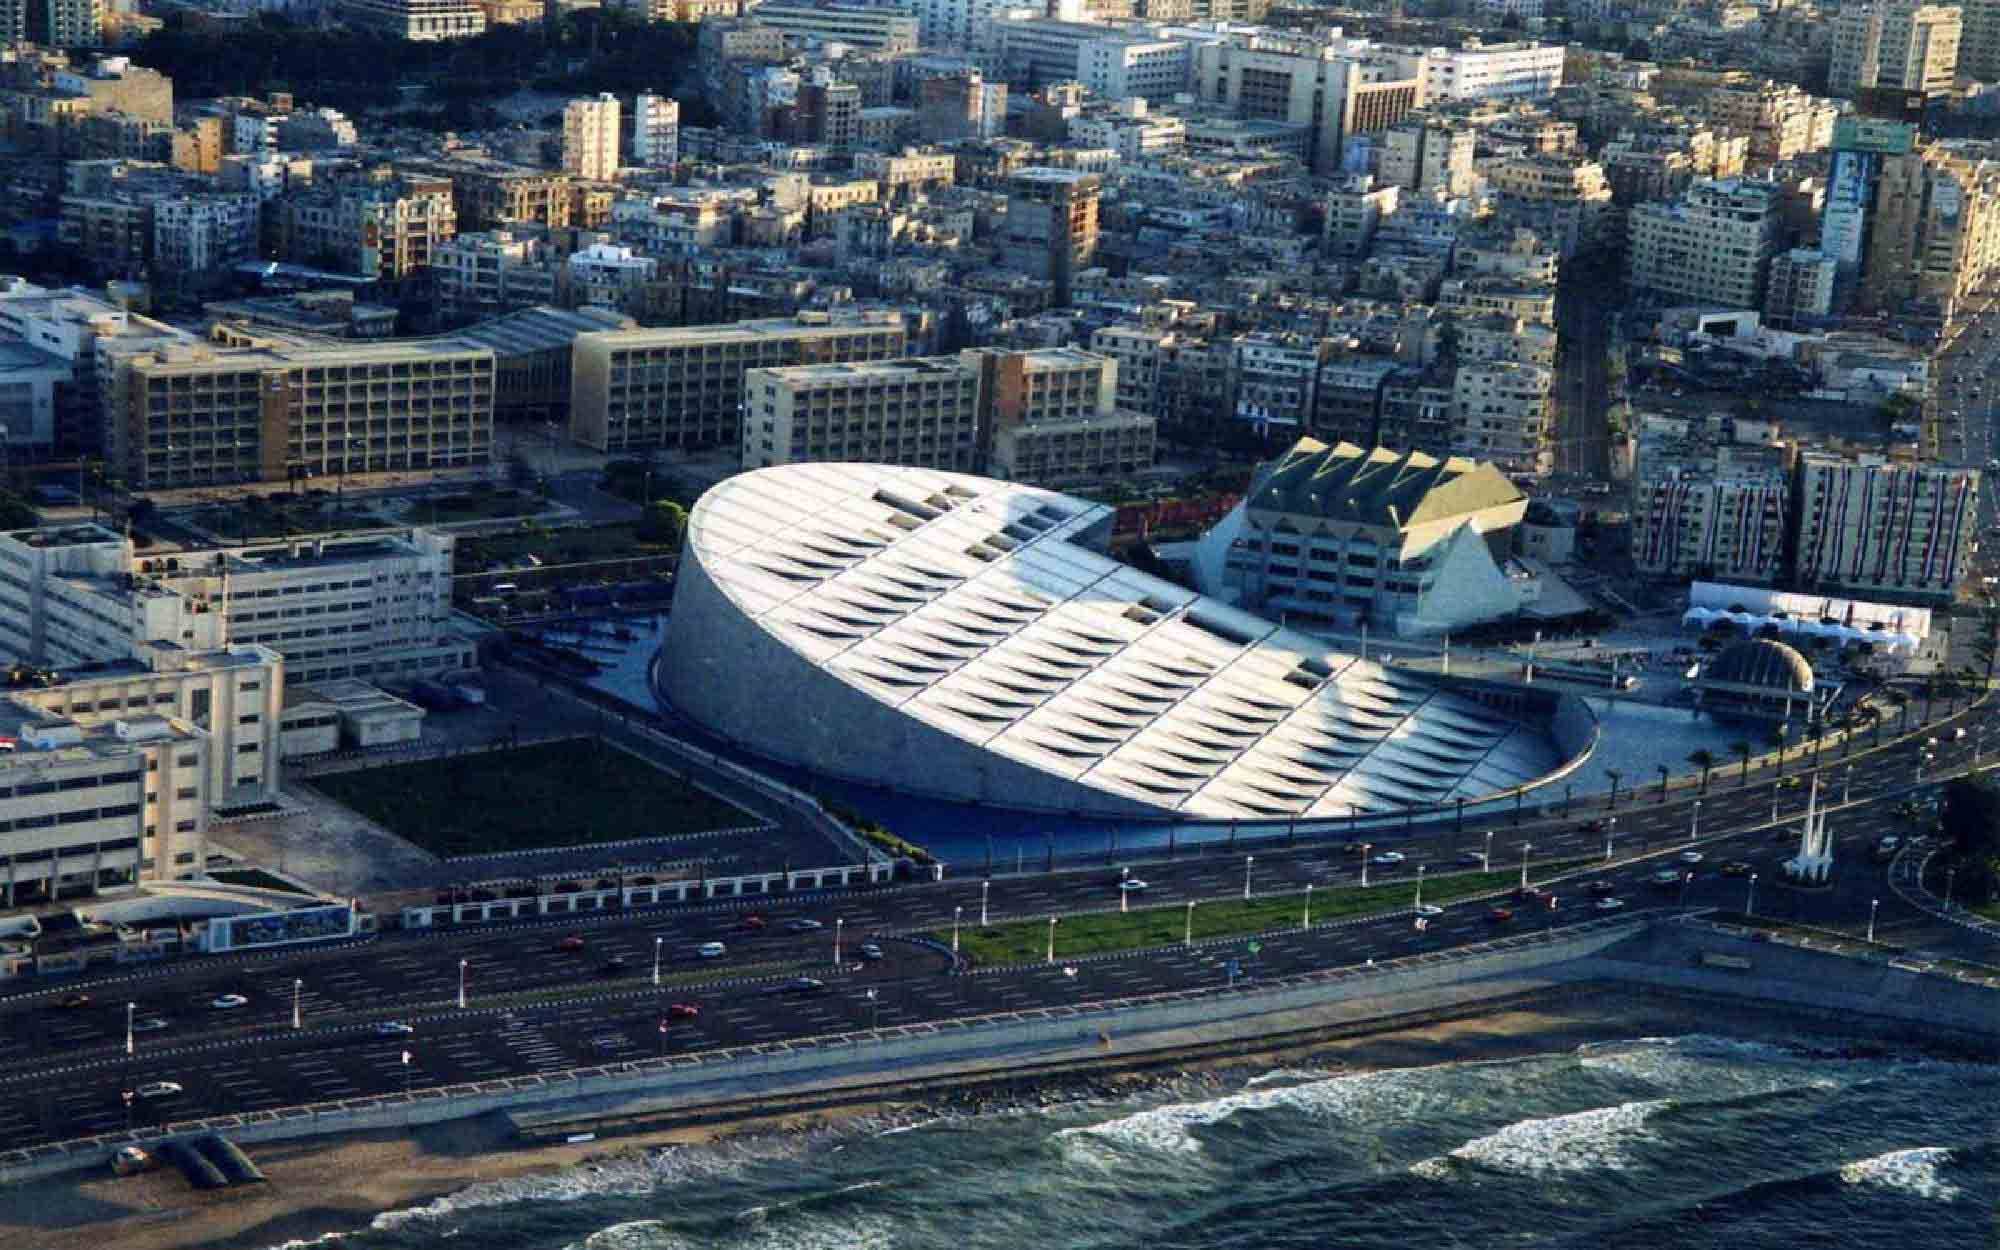 The Bibliotheca Alexandrina is a major library and cultural center located on the shore of the Mediterranean Sea in the Egyptian city of Alexandria.